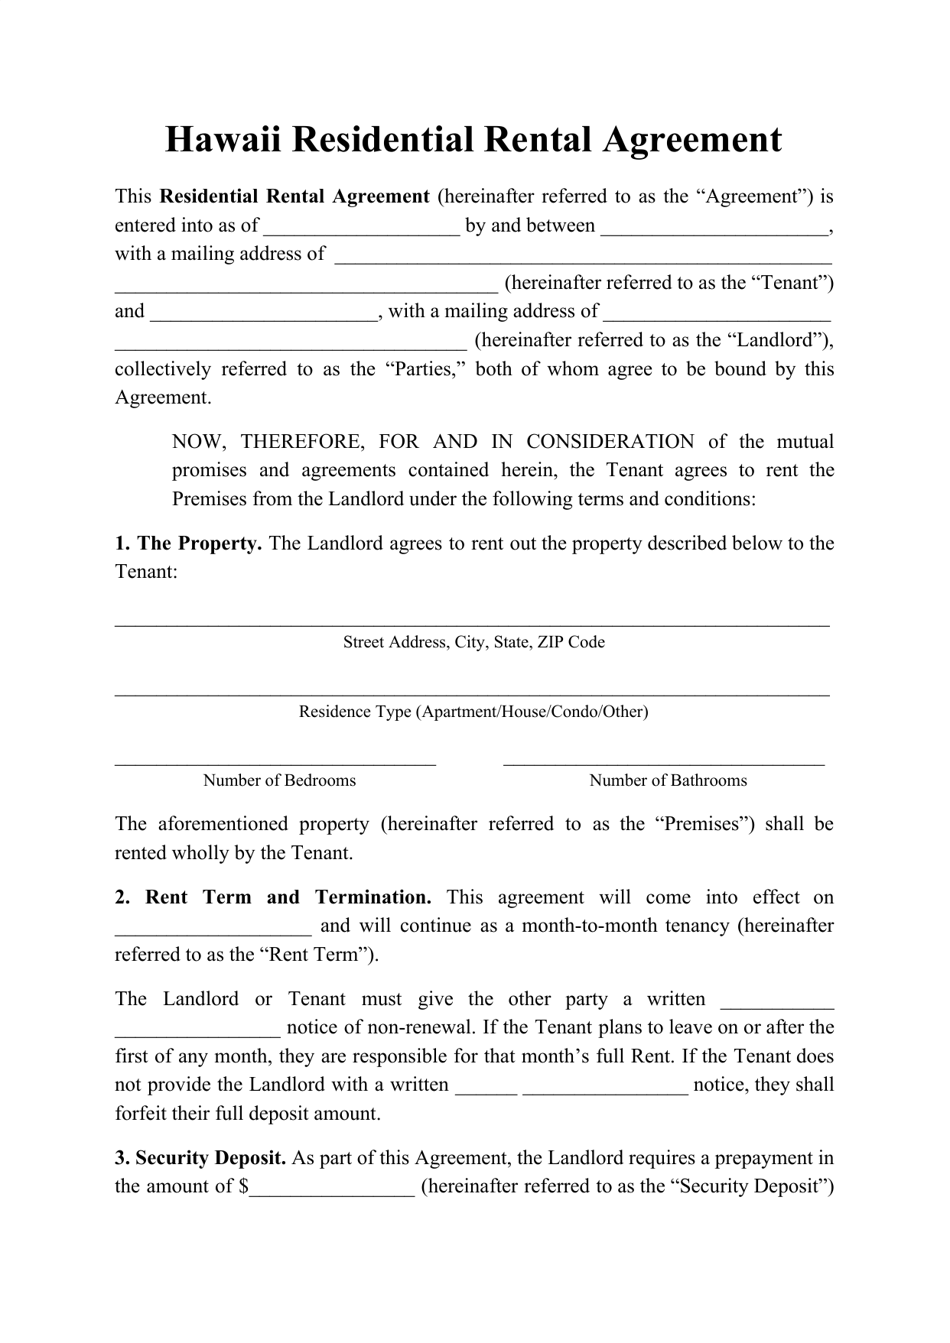 Residential Rental Agreement Template - Hawaii, Page 1